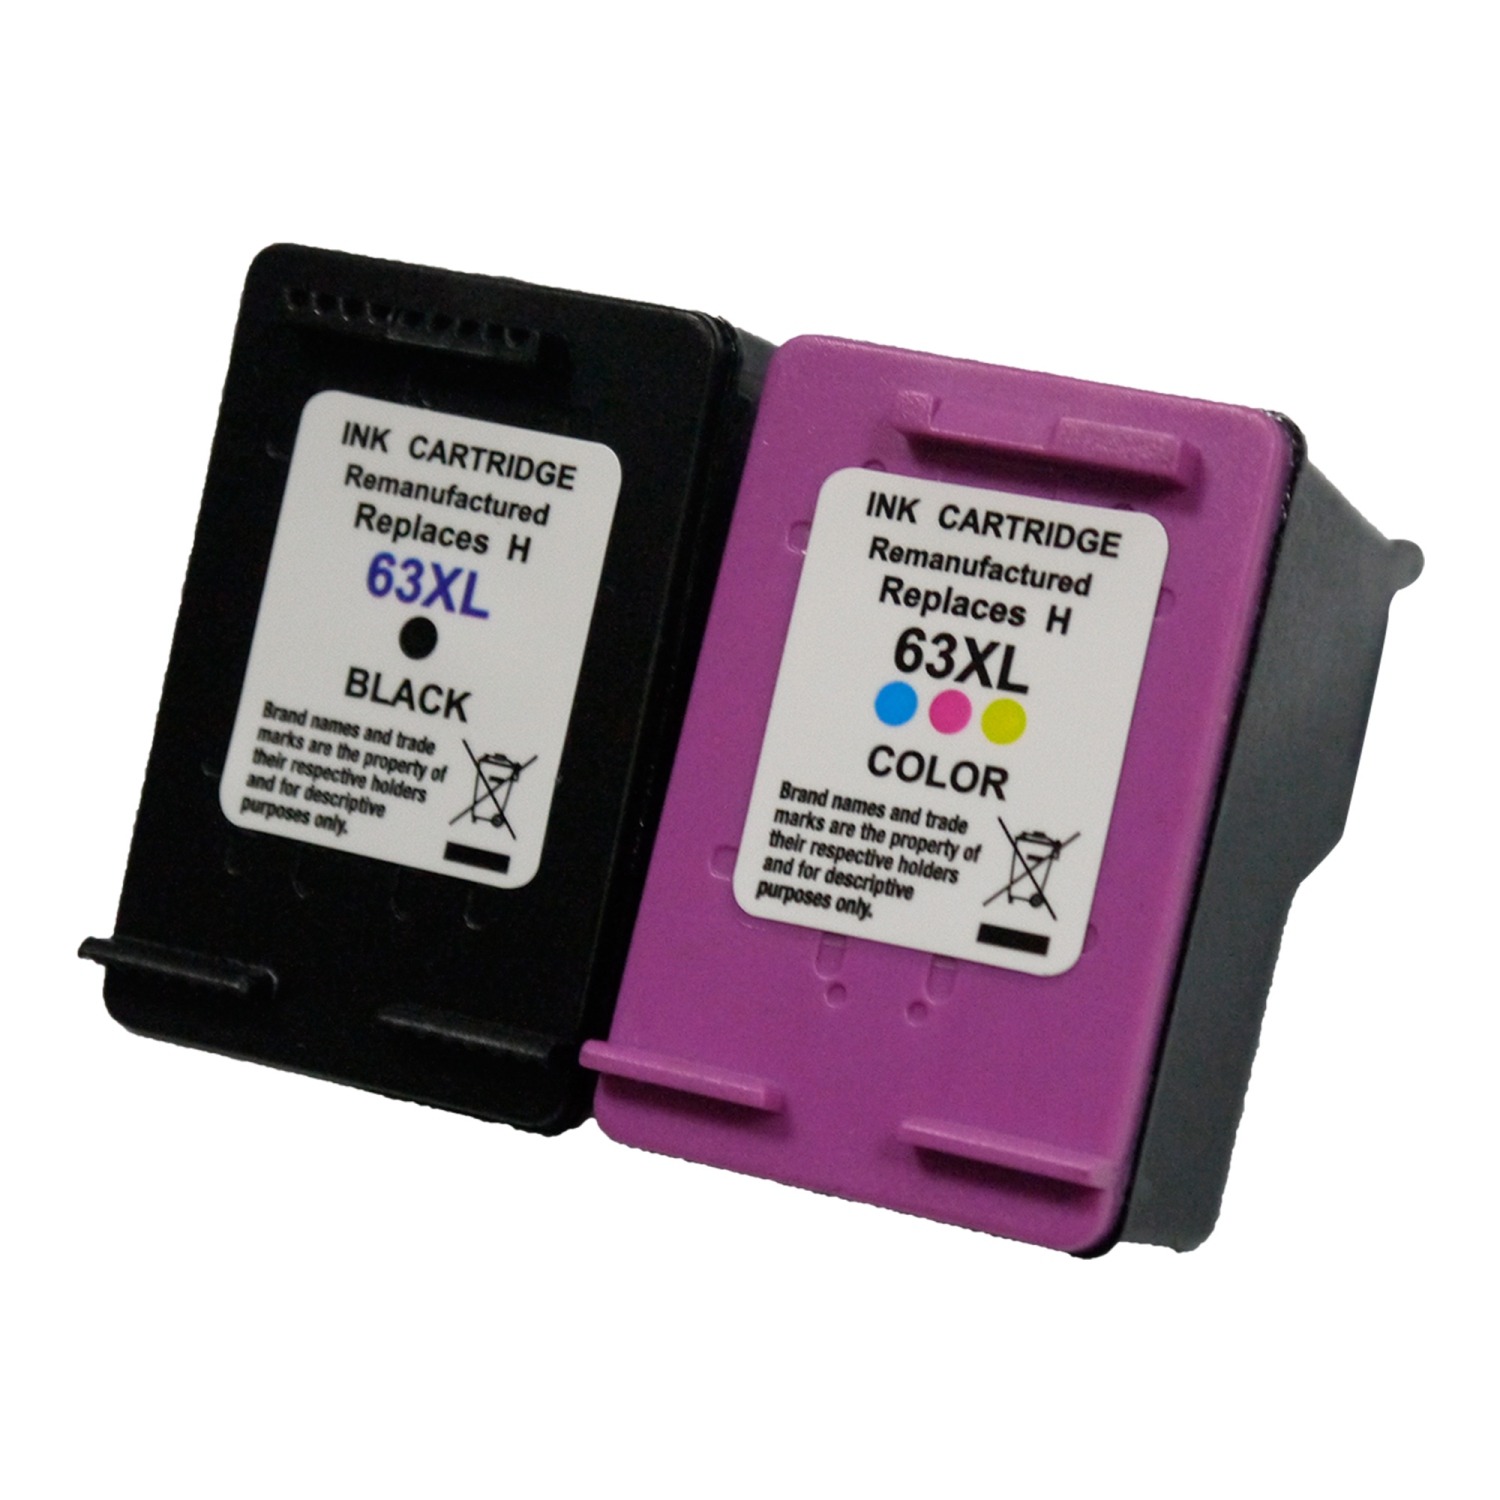 NEW SUPERIOR QUALITY! HP 63XL Compatible Ink Cartridge Set (BK, CLR) - FREE SHIPPING OVER $50!!